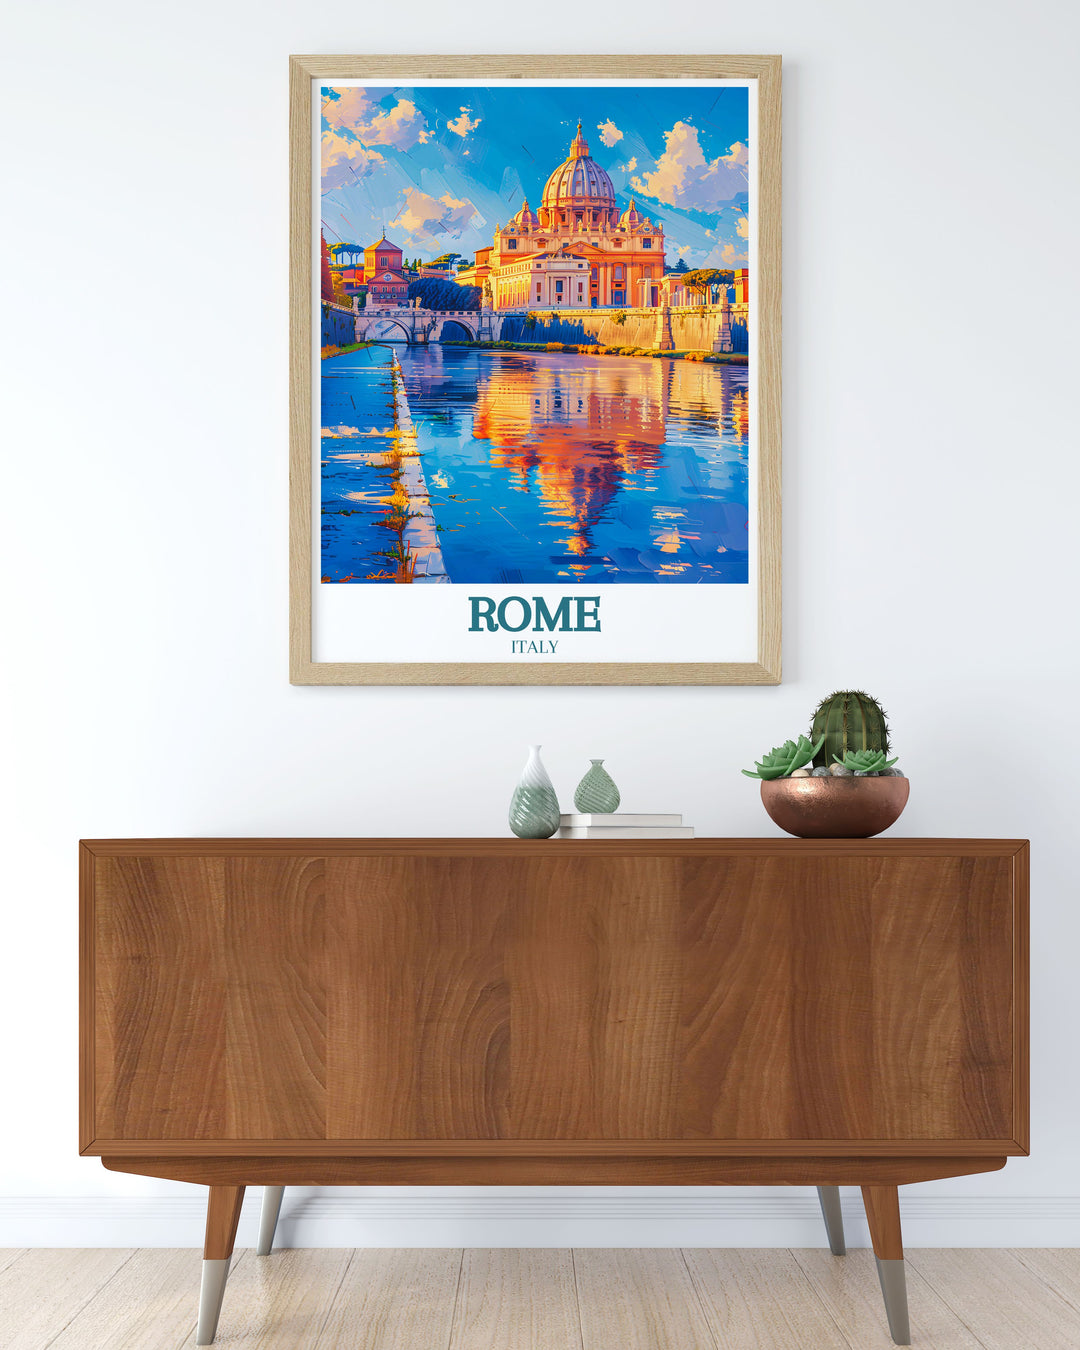 Elegant Rome poster showcasing the iconic St Basilica Vatican City perfect for those who appreciate historical landmarks and sophisticated decor makes an excellent gift for travel enthusiasts and history buffs alike.